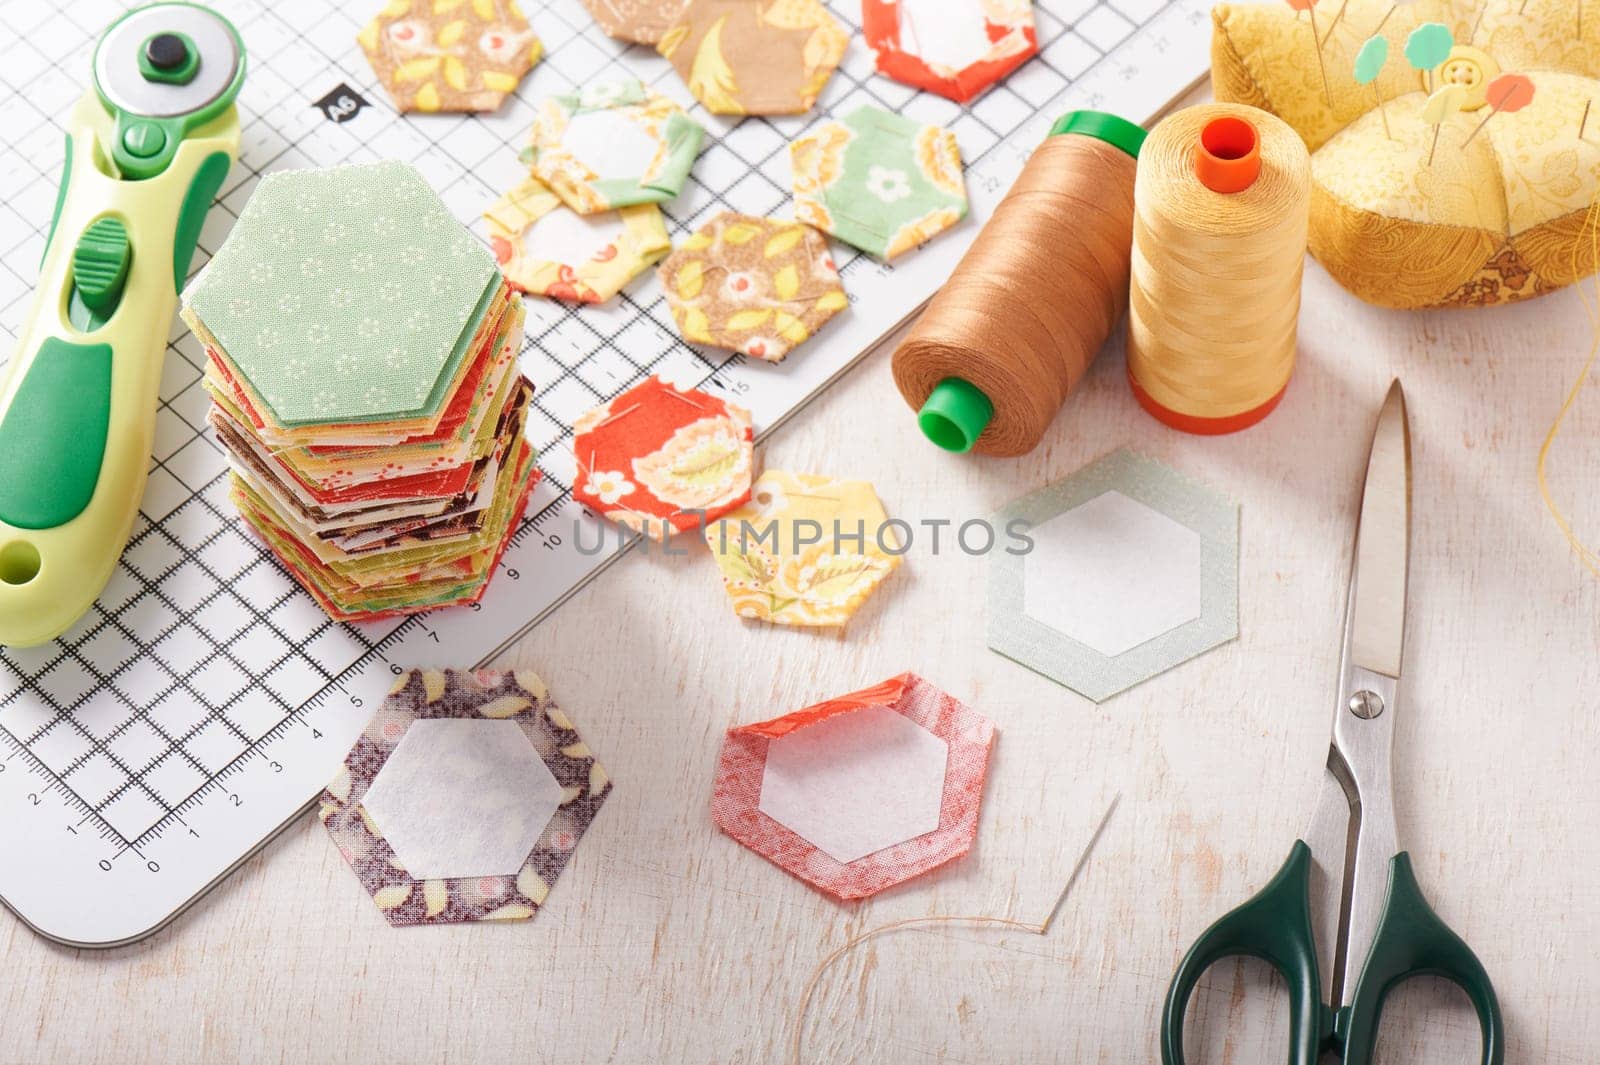 English paper pieced hexagons on white craft mat, sewing equipment